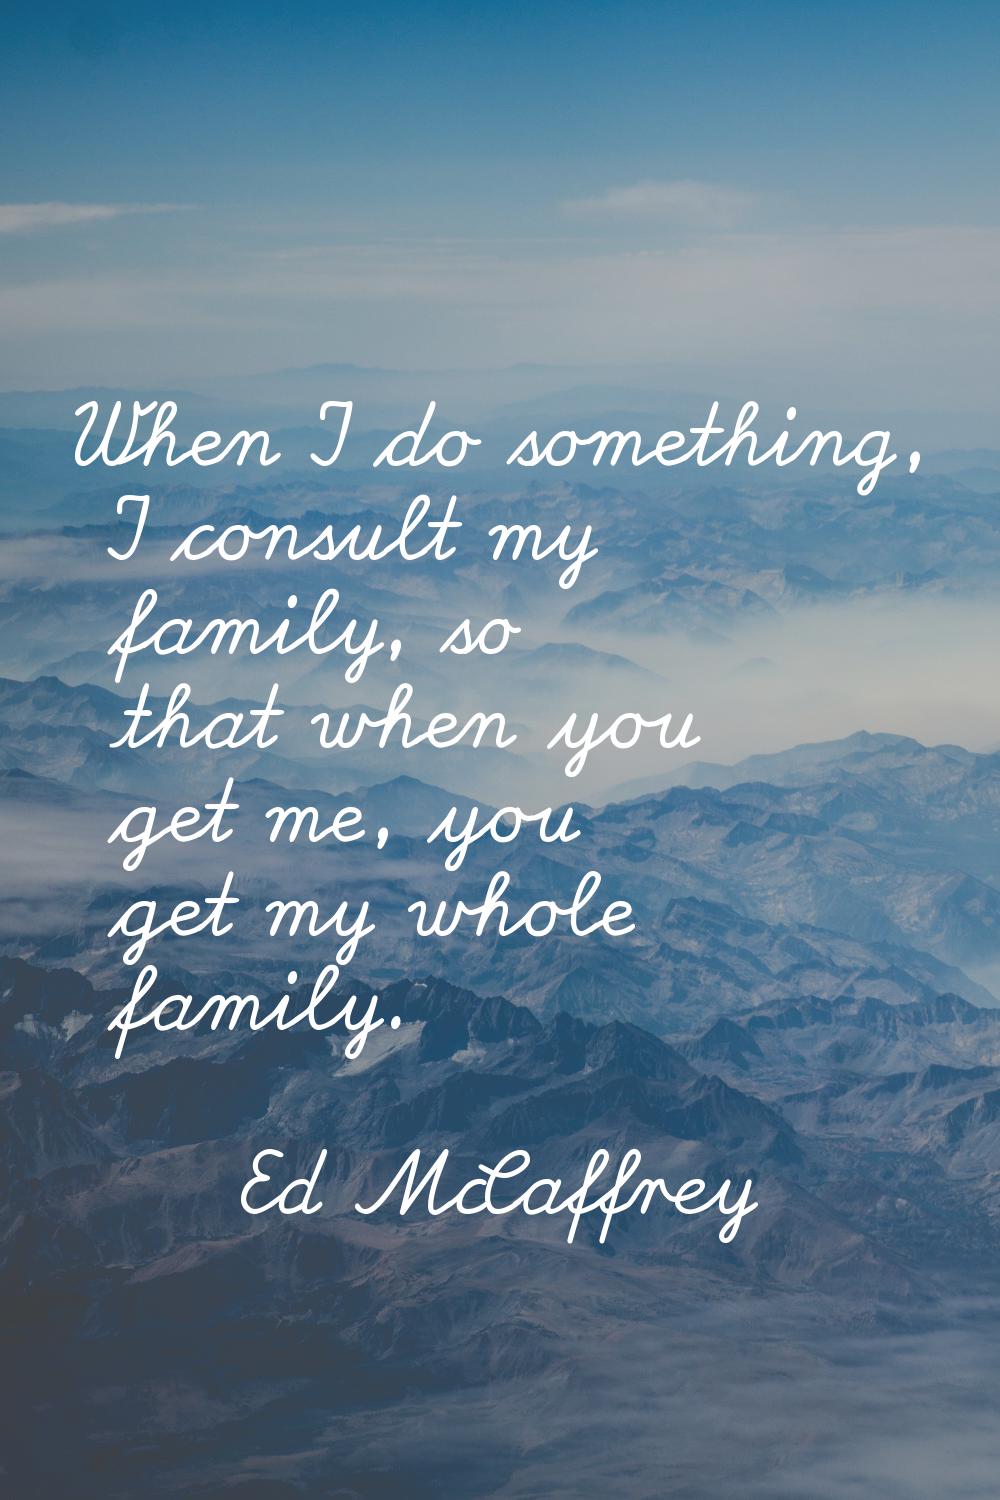 When I do something, I consult my family, so that when you get me, you get my whole family.